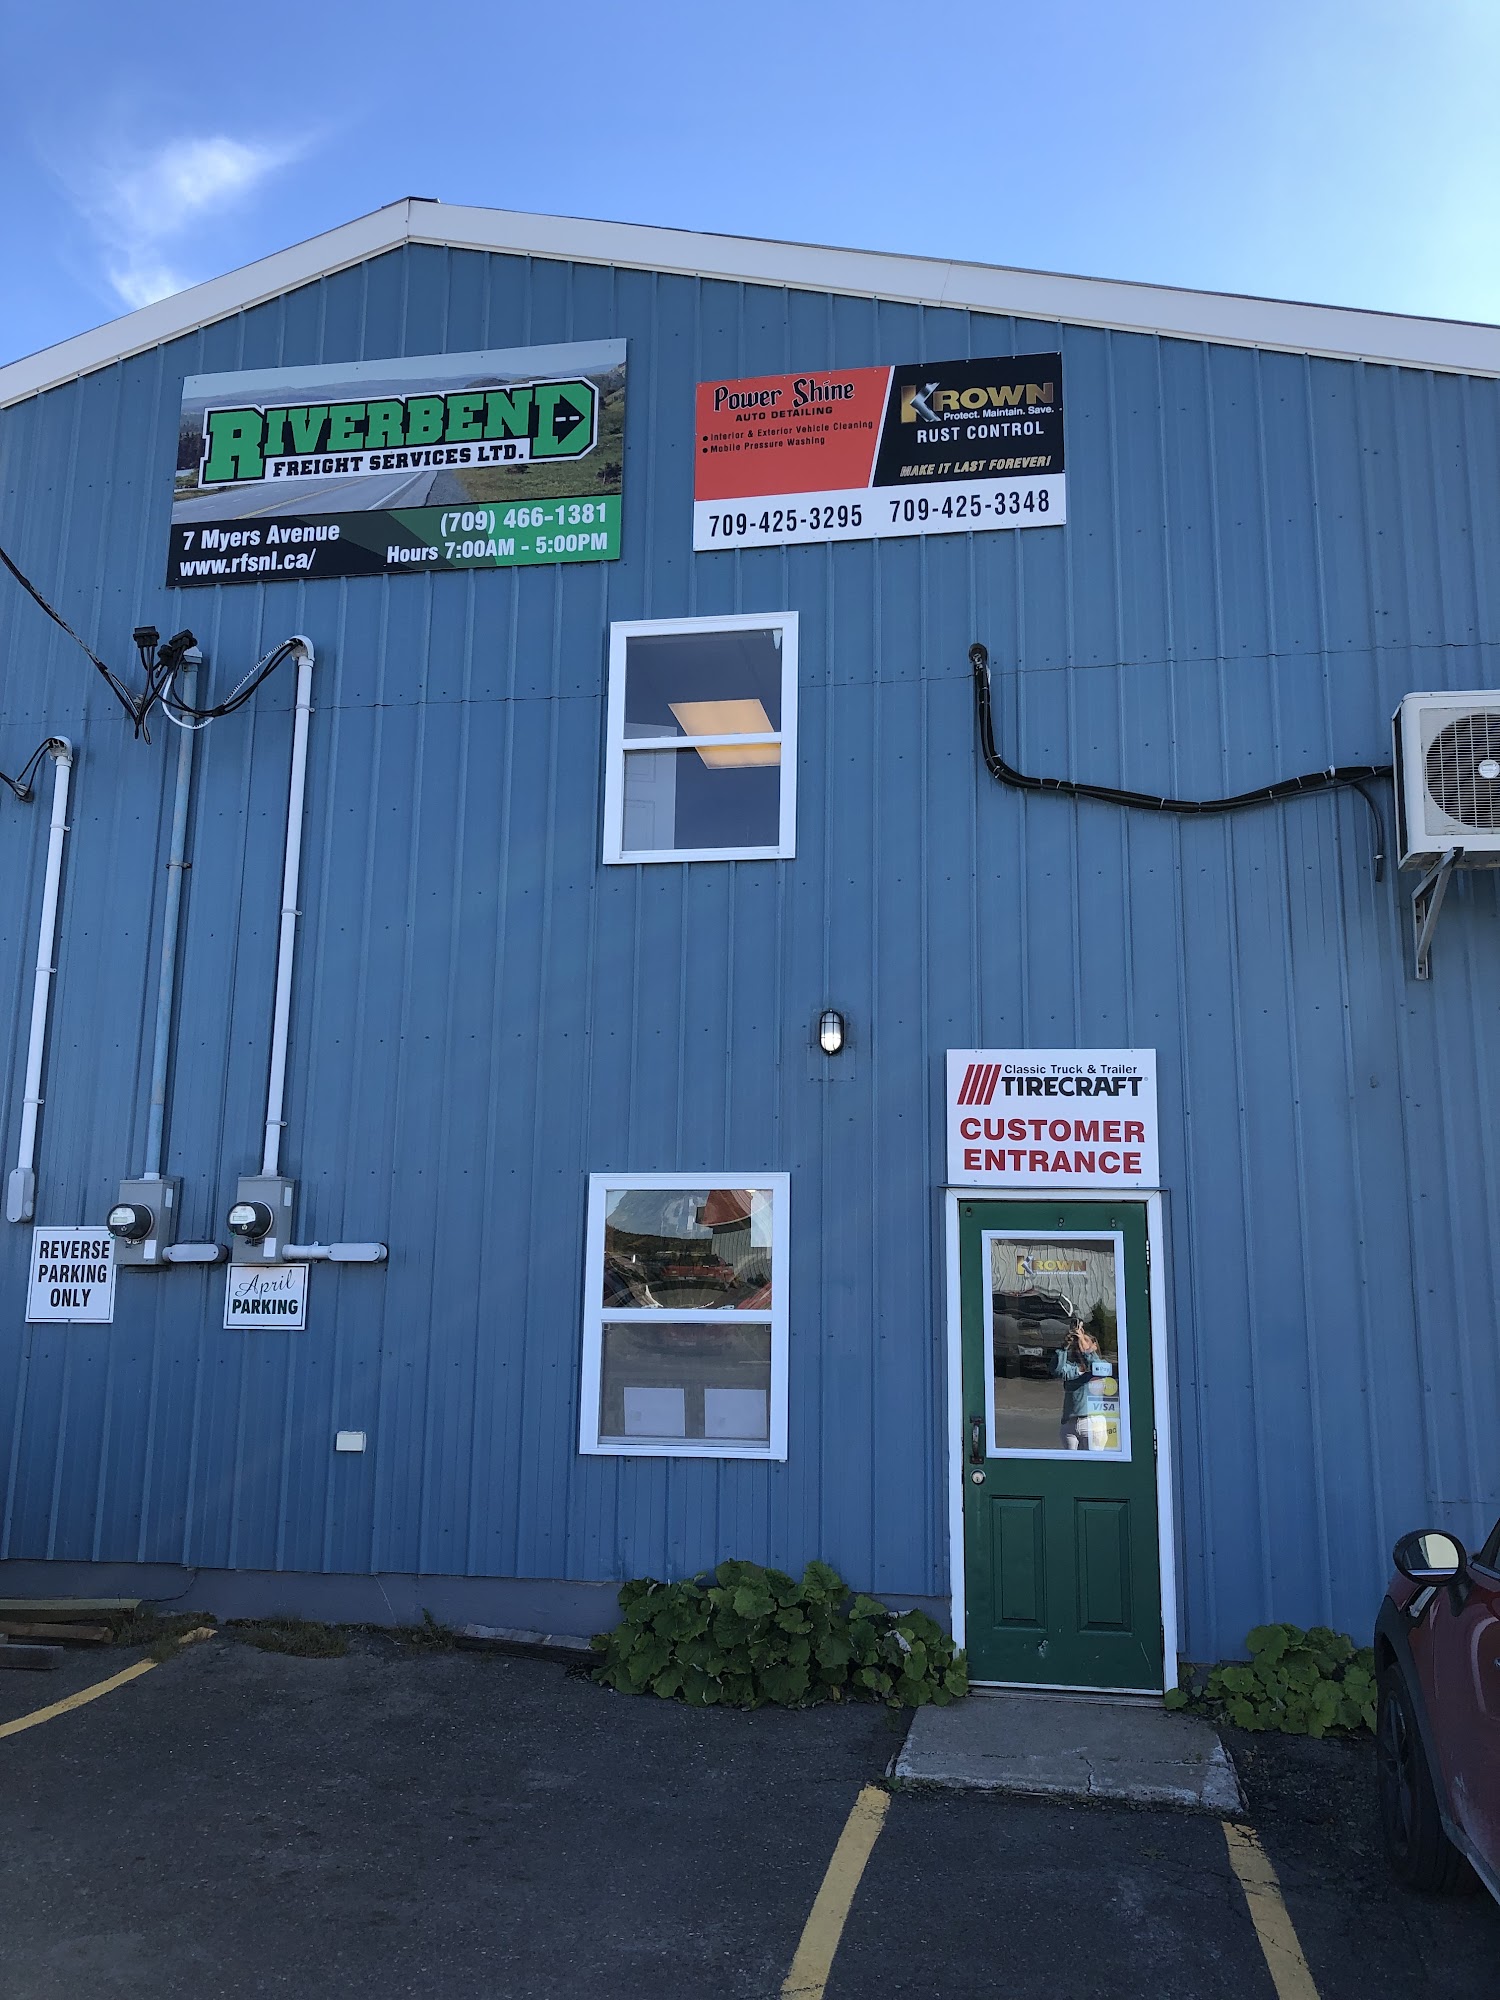 Power Shine / Krown Rust Protection 7 Myers Ave, Clarenville Newfoundland and Labrador A5A 1T5